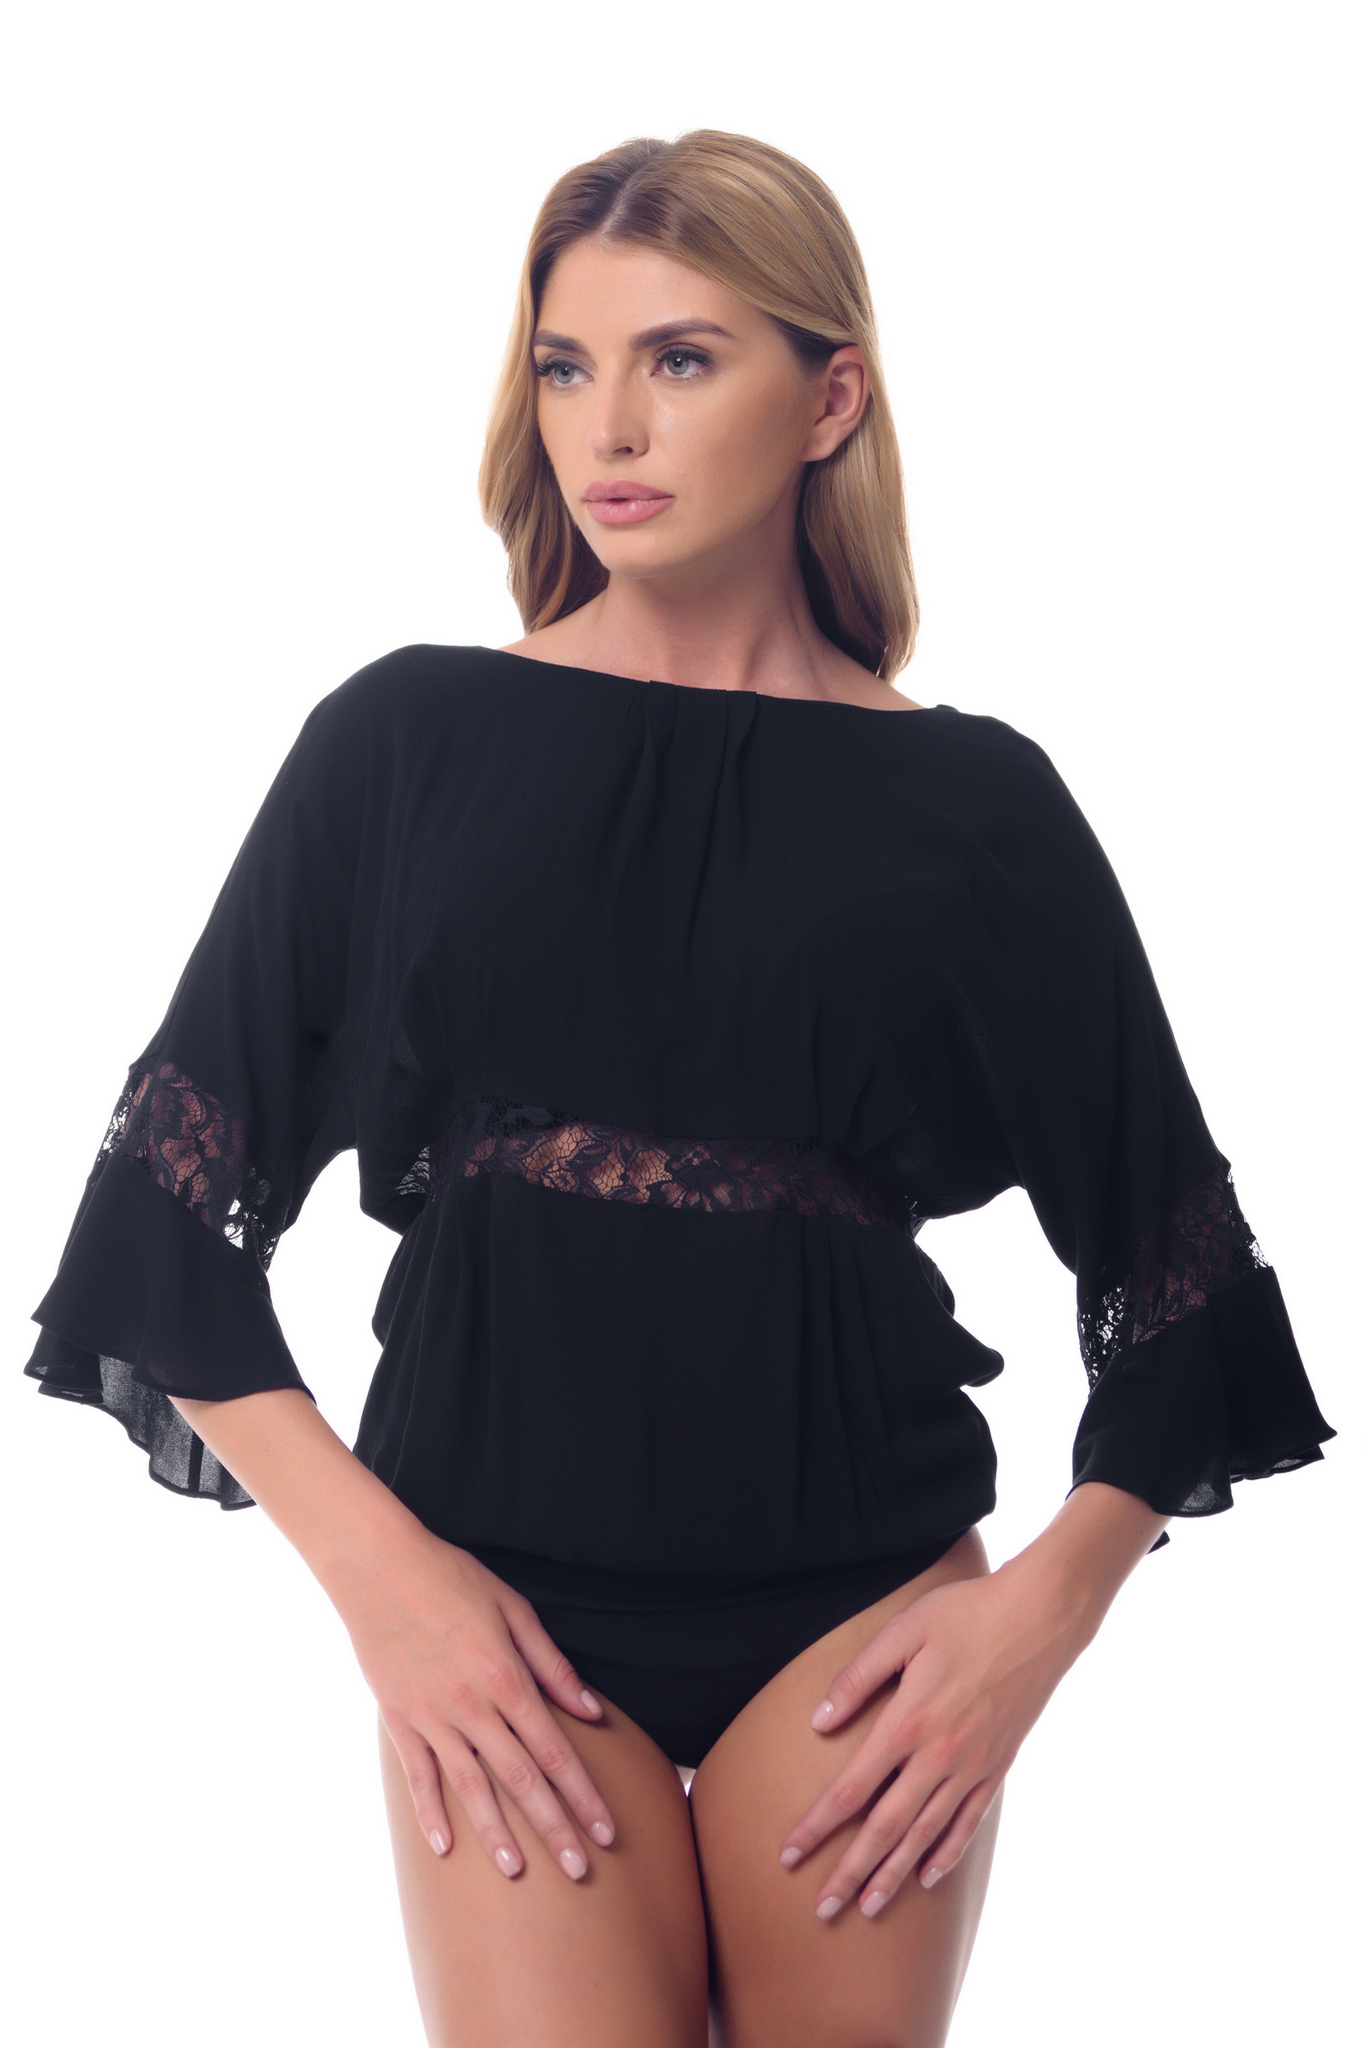 Buy Women Black blouse body Lace Summer Short sleeve Business Office clothes by Arefeva